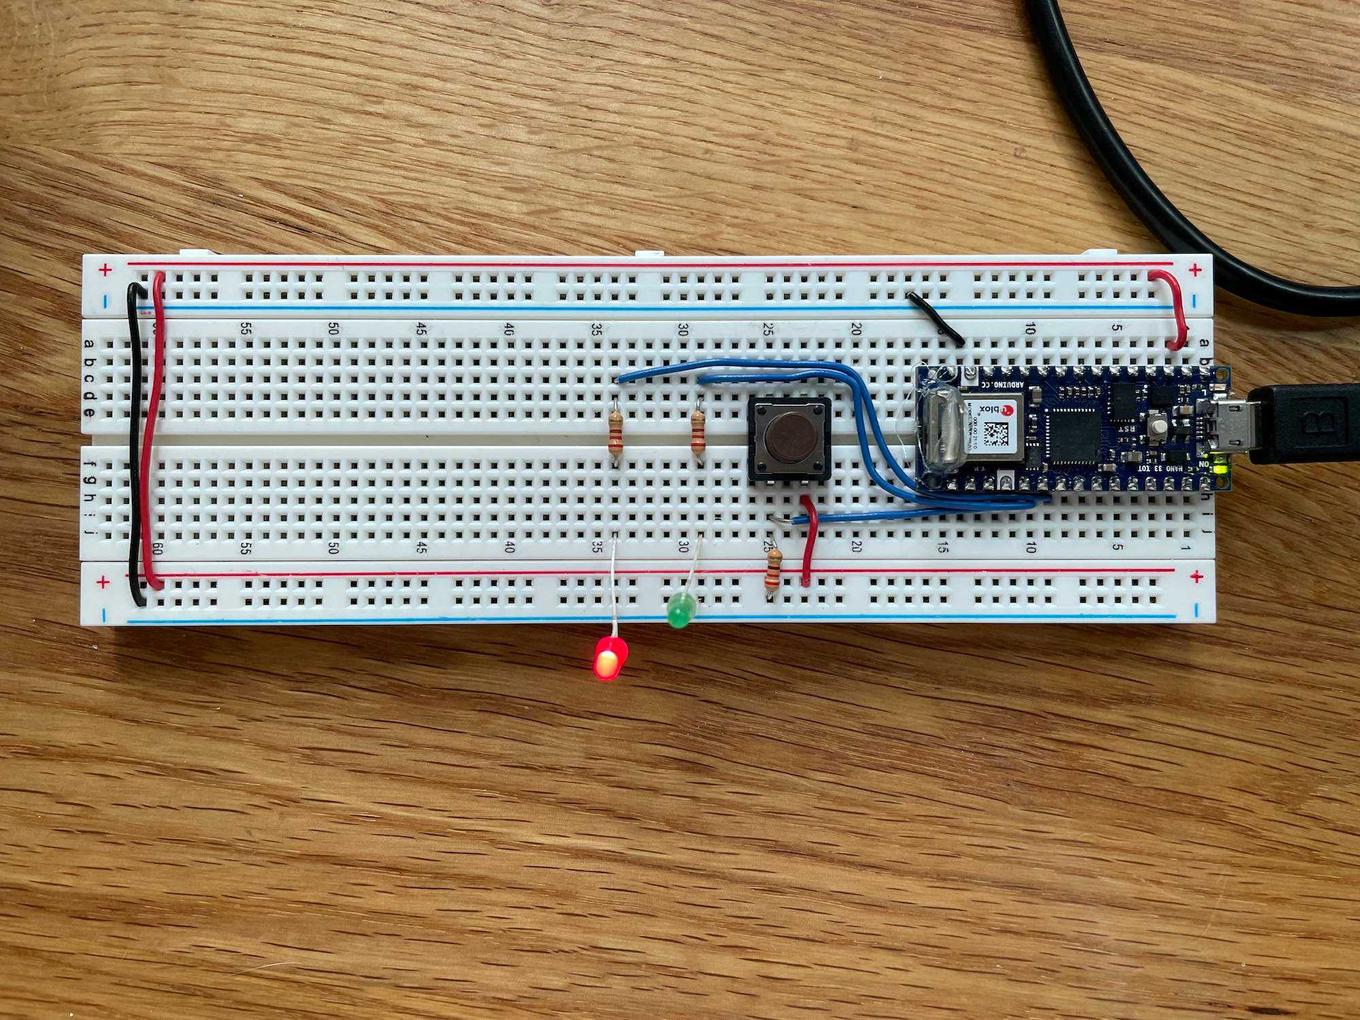 Breadboard with an Arduino Nano 33 IOT, button, and two LEDs (one red, one green). The red LED is lit.